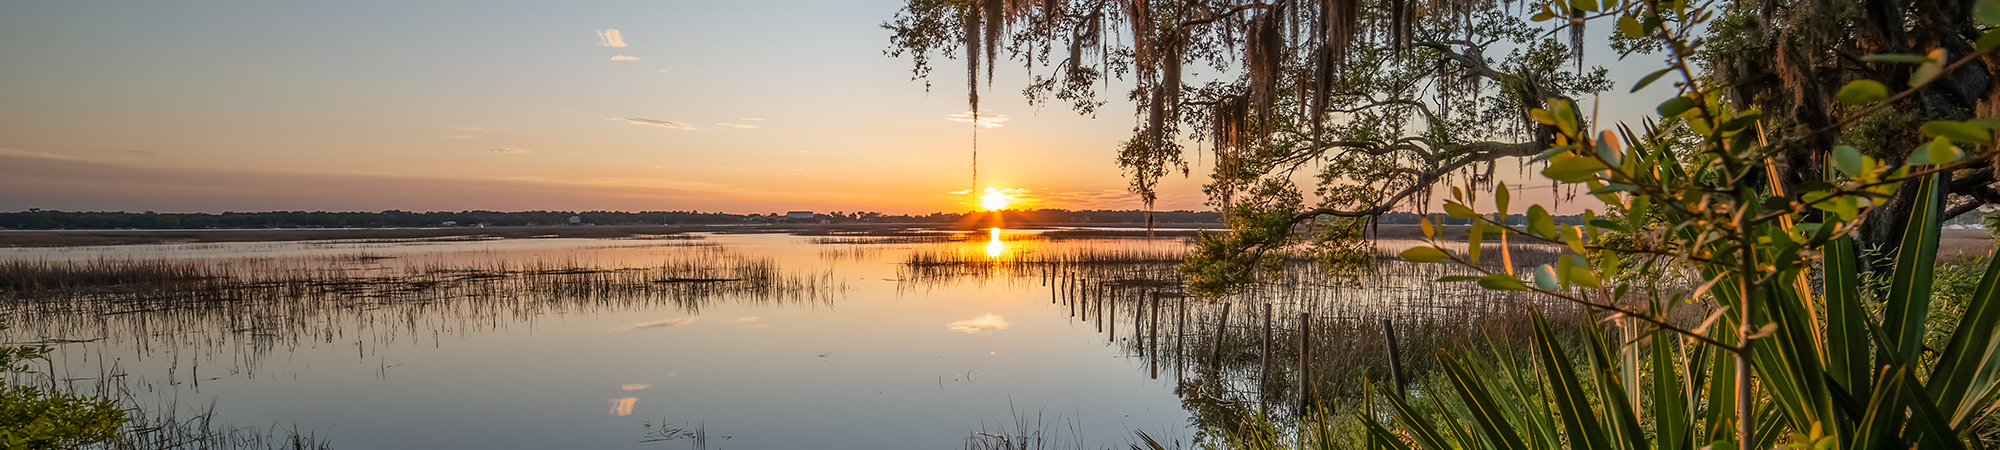 A salt marsh tidal creek with the sun setting over the water, trees and plants in the foreground.